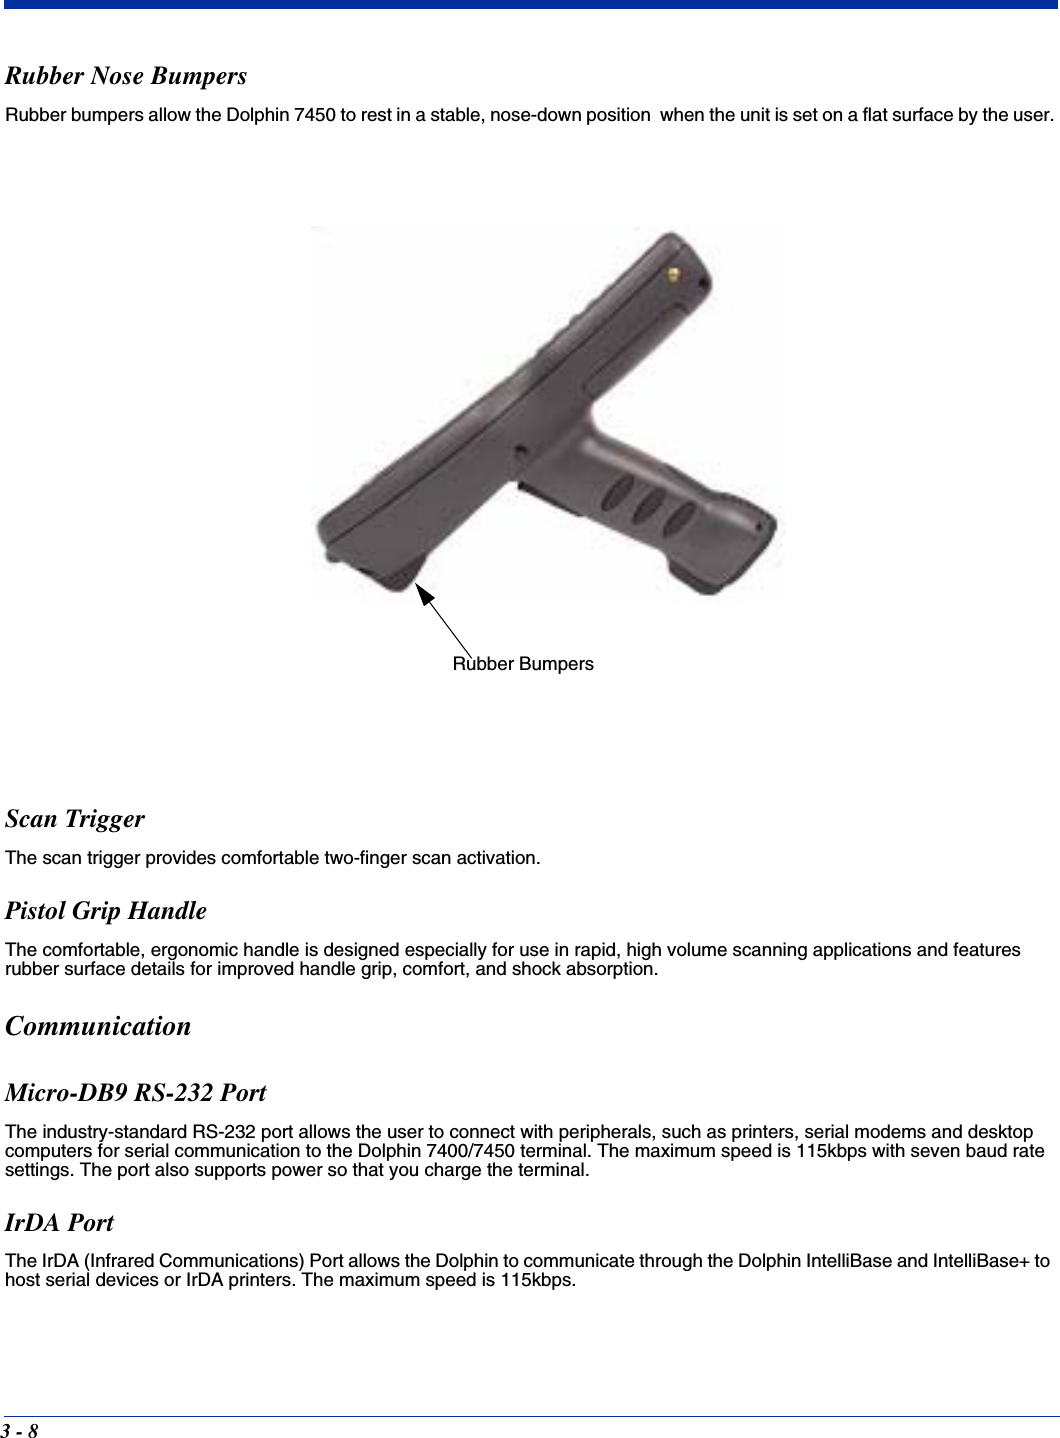 3 - 8Rubber Nose BumpersRubber bumpers allow the Dolphin 7450 to rest in a stable, nose-down position  when the unit is set on a flat surface by the user.Scan TriggerThe scan trigger provides comfortable two-finger scan activation.Pistol Grip HandleThe comfortable, ergonomic handle is designed especially for use in rapid, high volume scanning applications and features rubber surface details for improved handle grip, comfort, and shock absorption.CommunicationMicro-DB9 RS-232 PortThe industry-standard RS-232 port allows the user to connect with peripherals, such as printers, serial modems and desktop computers for serial communication to the Dolphin 7400/7450 terminal. The maximum speed is 115kbps with seven baud rate settings. The port also supports power so that you charge the terminal.IrDA PortThe IrDA (Infrared Communications) Port allows the Dolphin to communicate through the Dolphin IntelliBase and IntelliBase+ to host serial devices or IrDA printers. The maximum speed is 115kbps.Rubber Bumpers